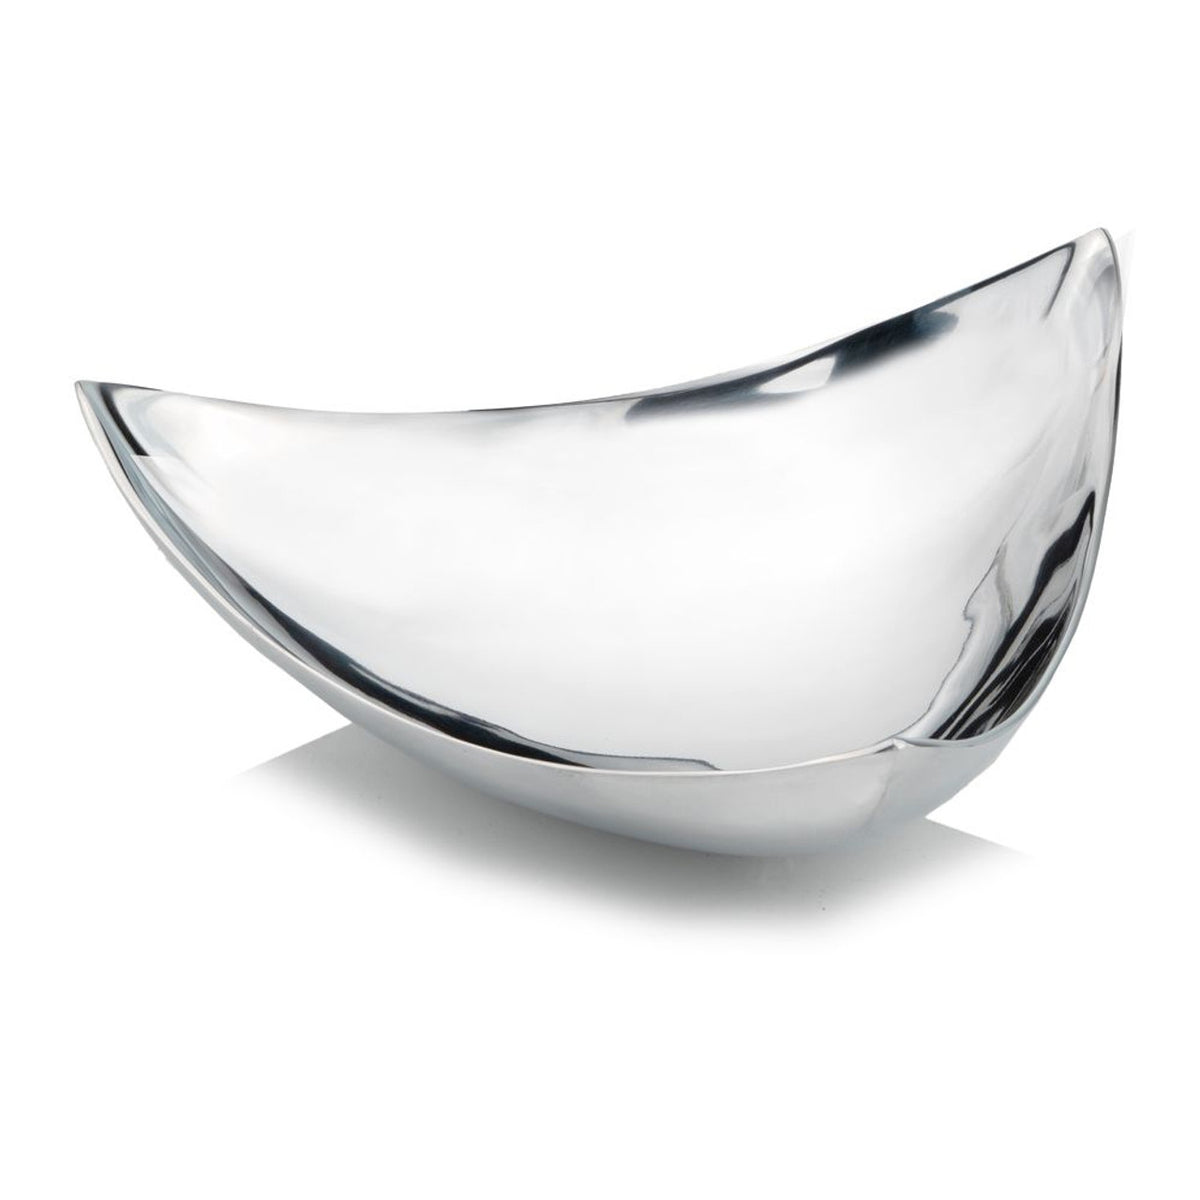 Triangulated Silver Polished Decorative Bowl Tray